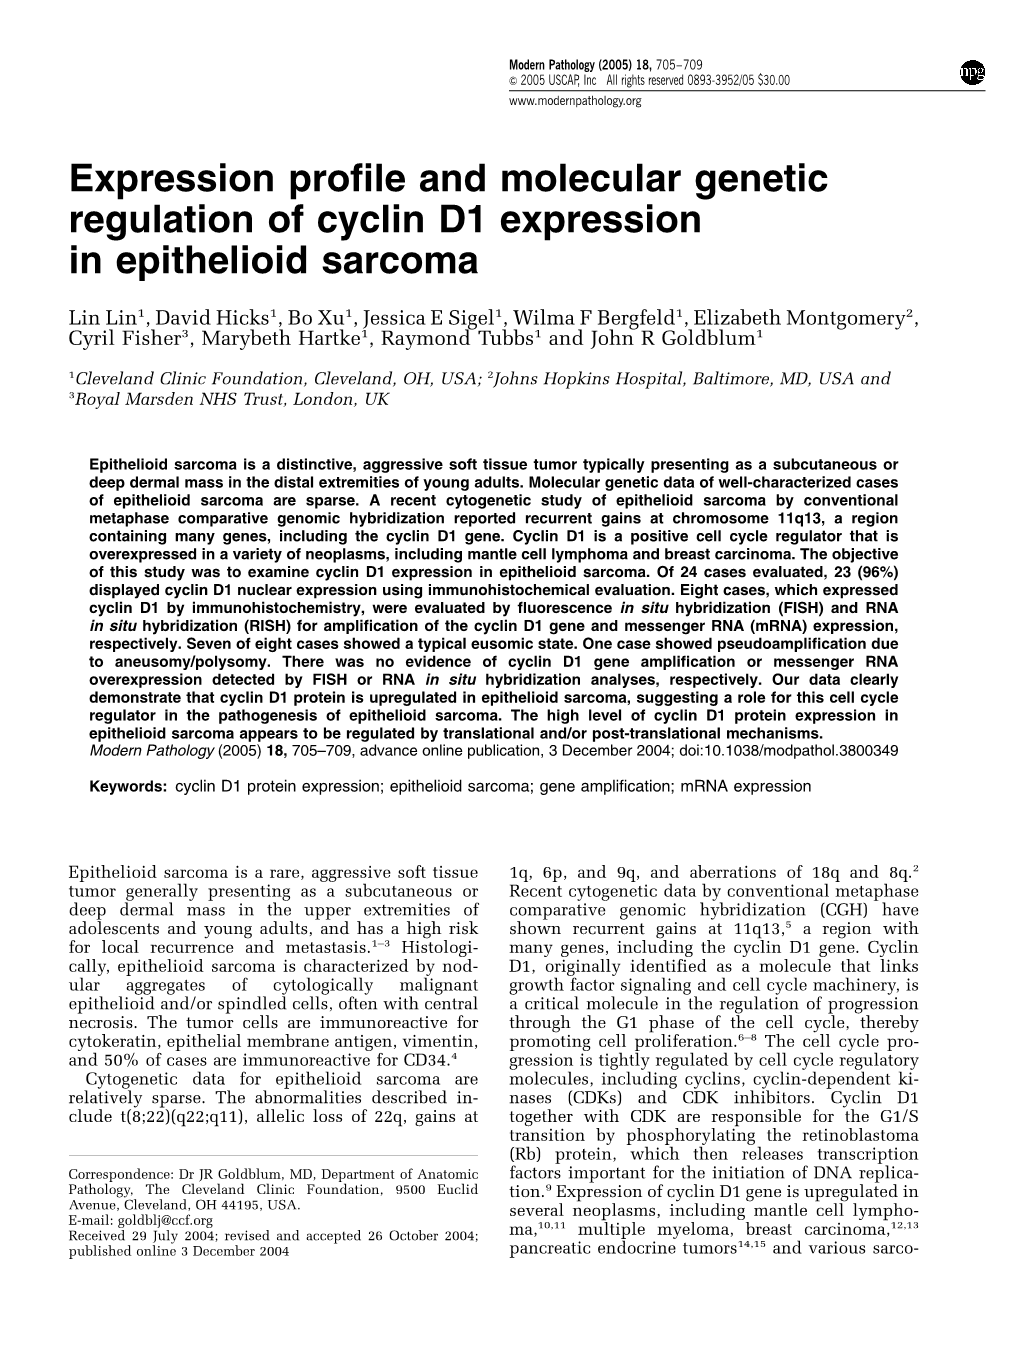 Expression Profile and Molecular Genetic Regulation of Cyclin D1 Expression in Epithelioid Sarcoma